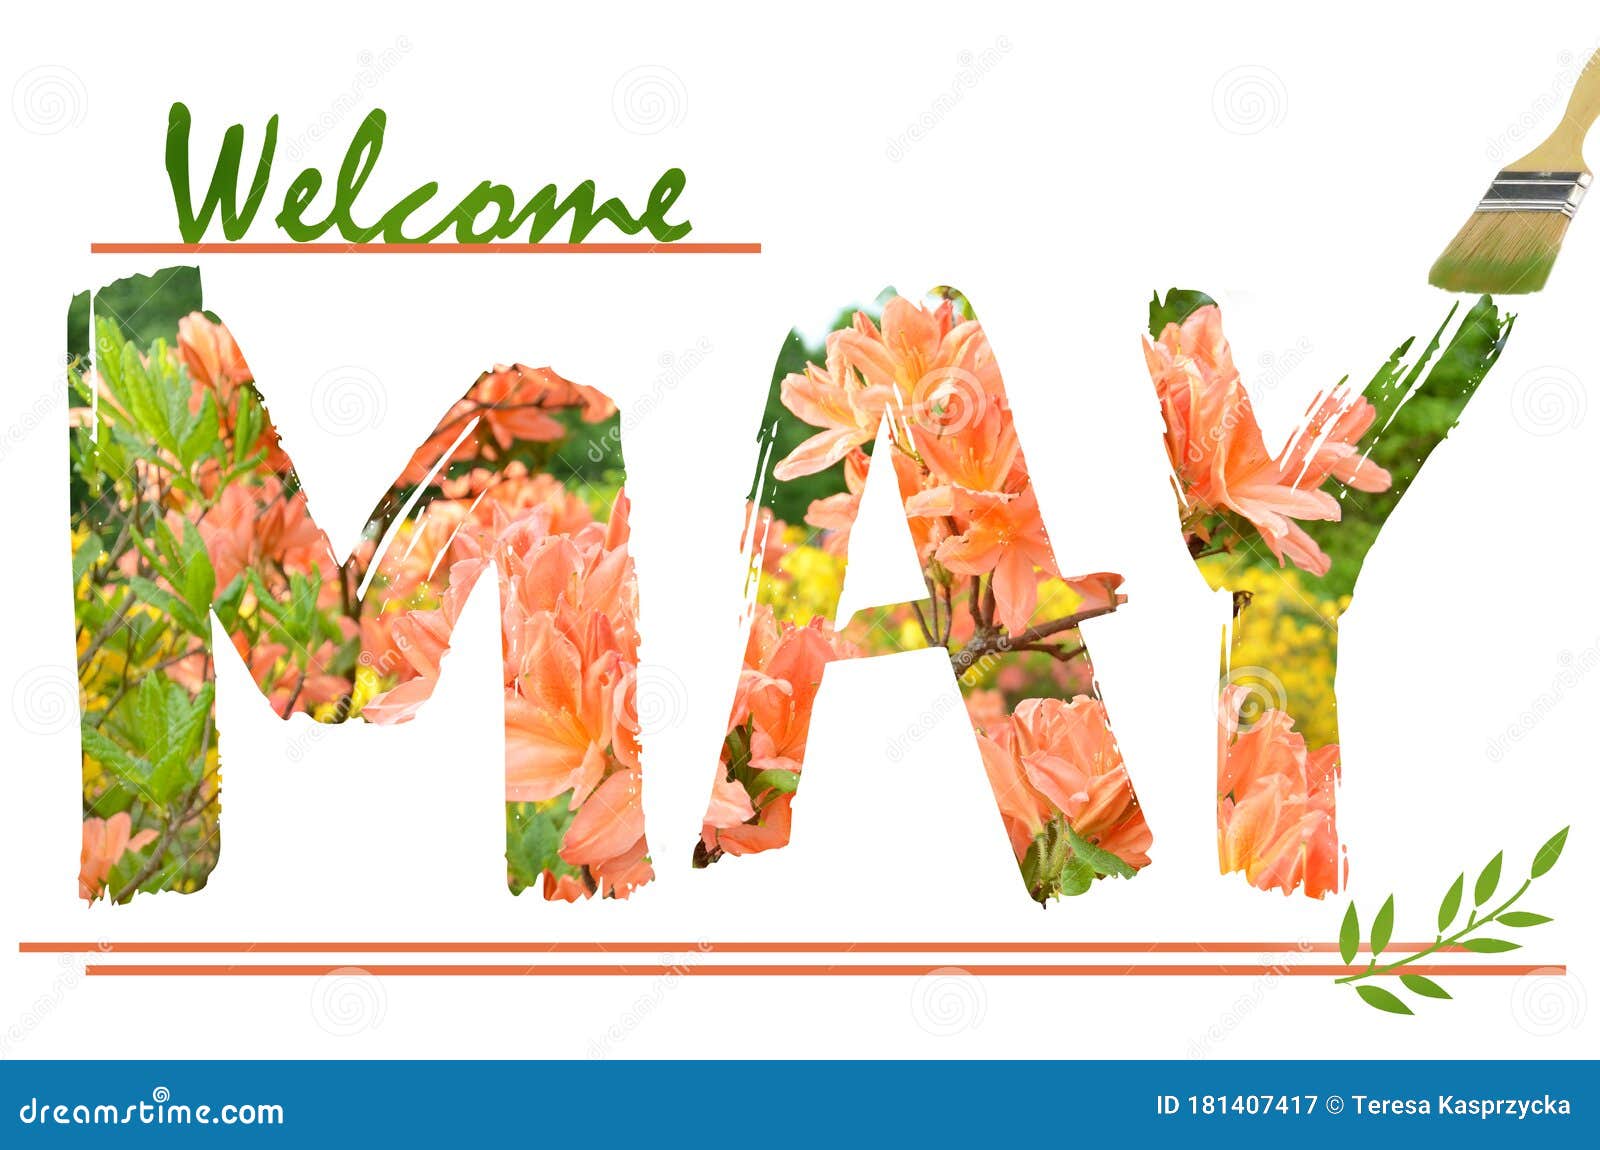 welcome may background with azalea flowers